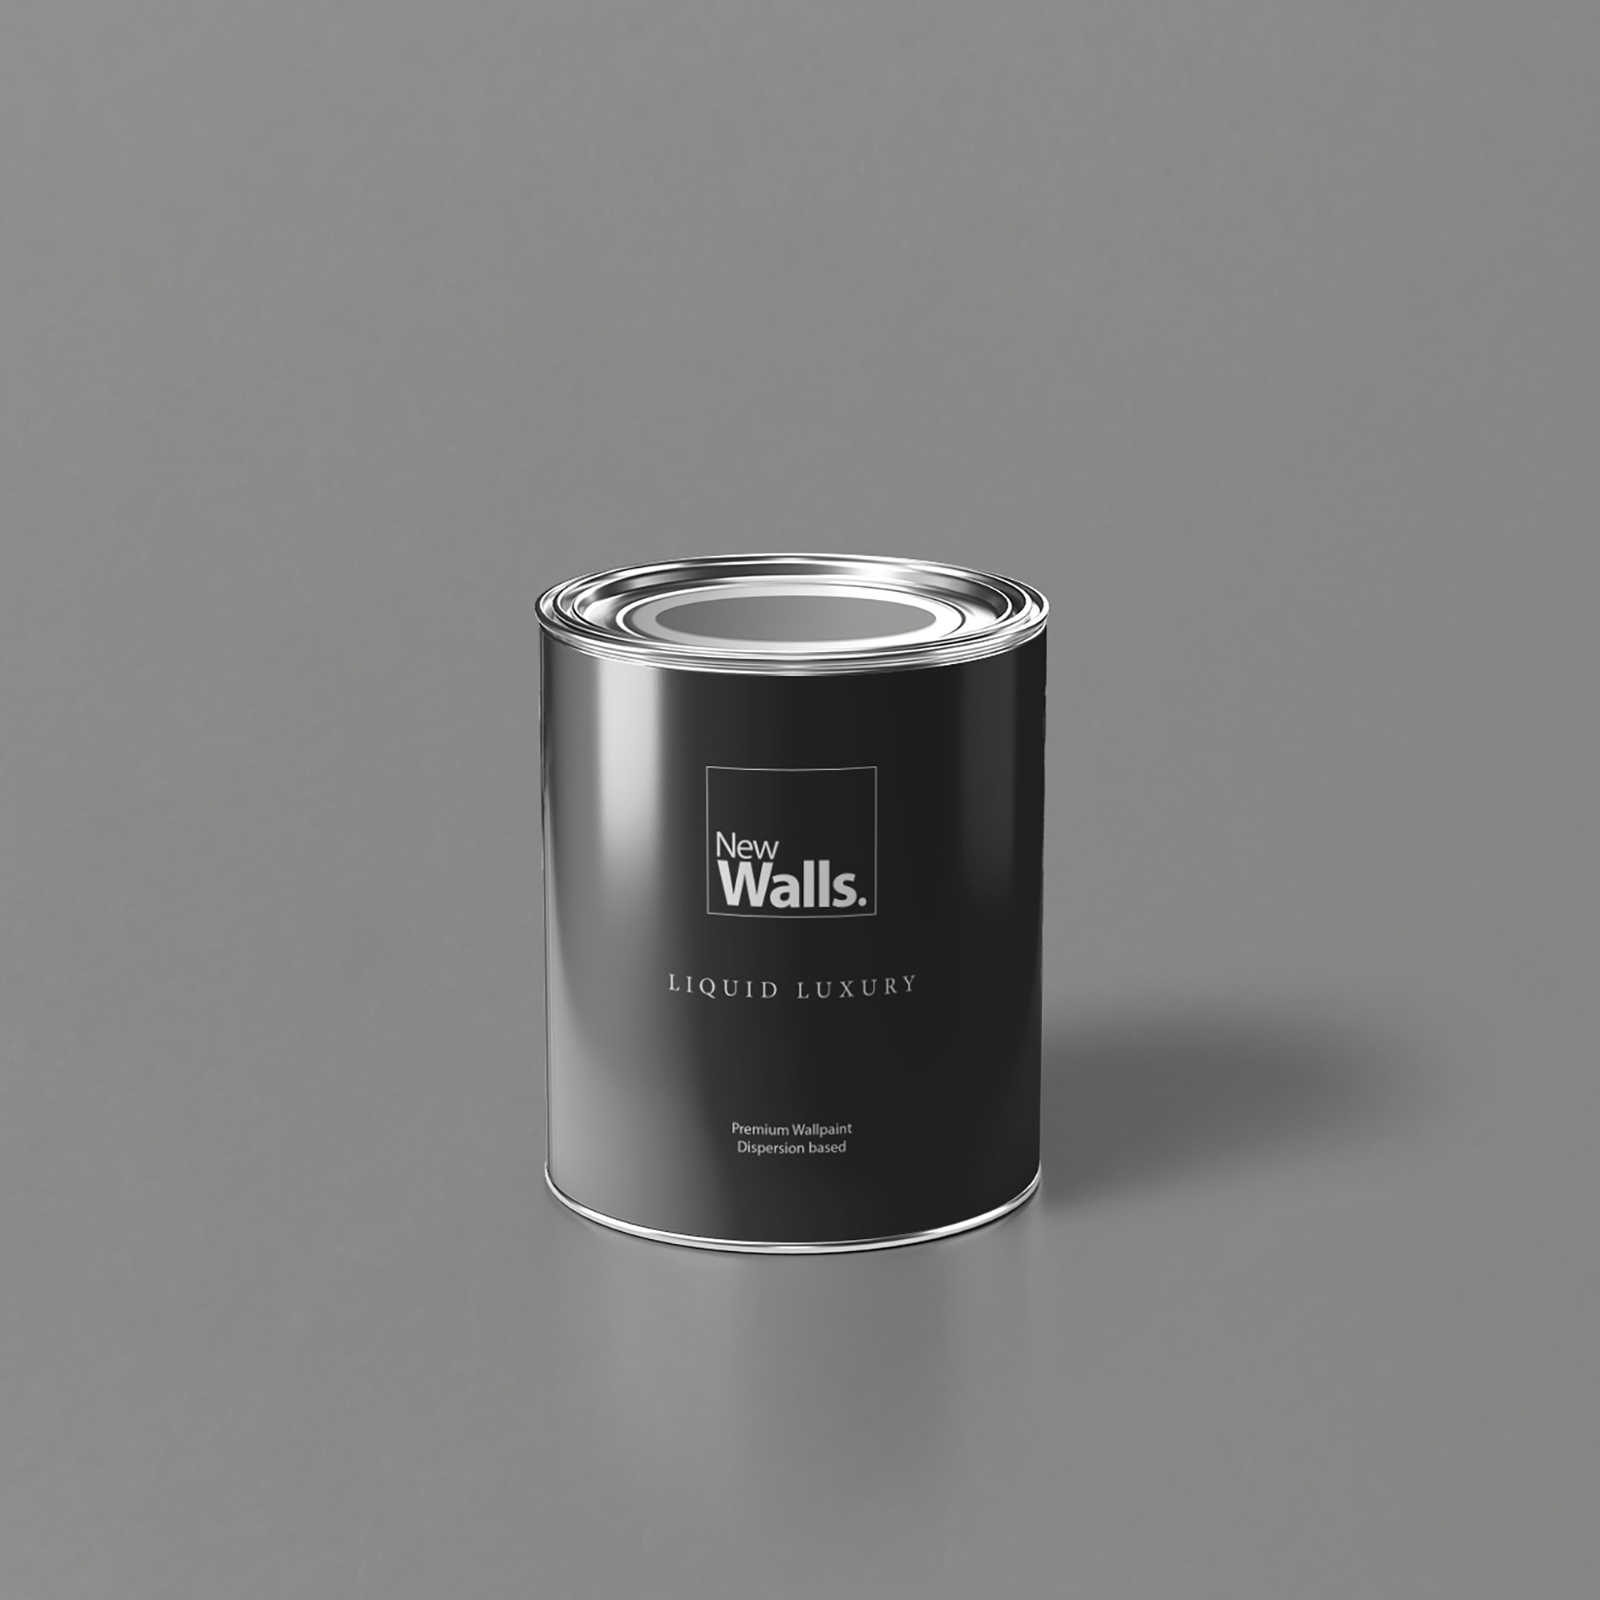 Premium Wall Paint neutral stone grey »Industrial Grey« NW102 – 1 litre
